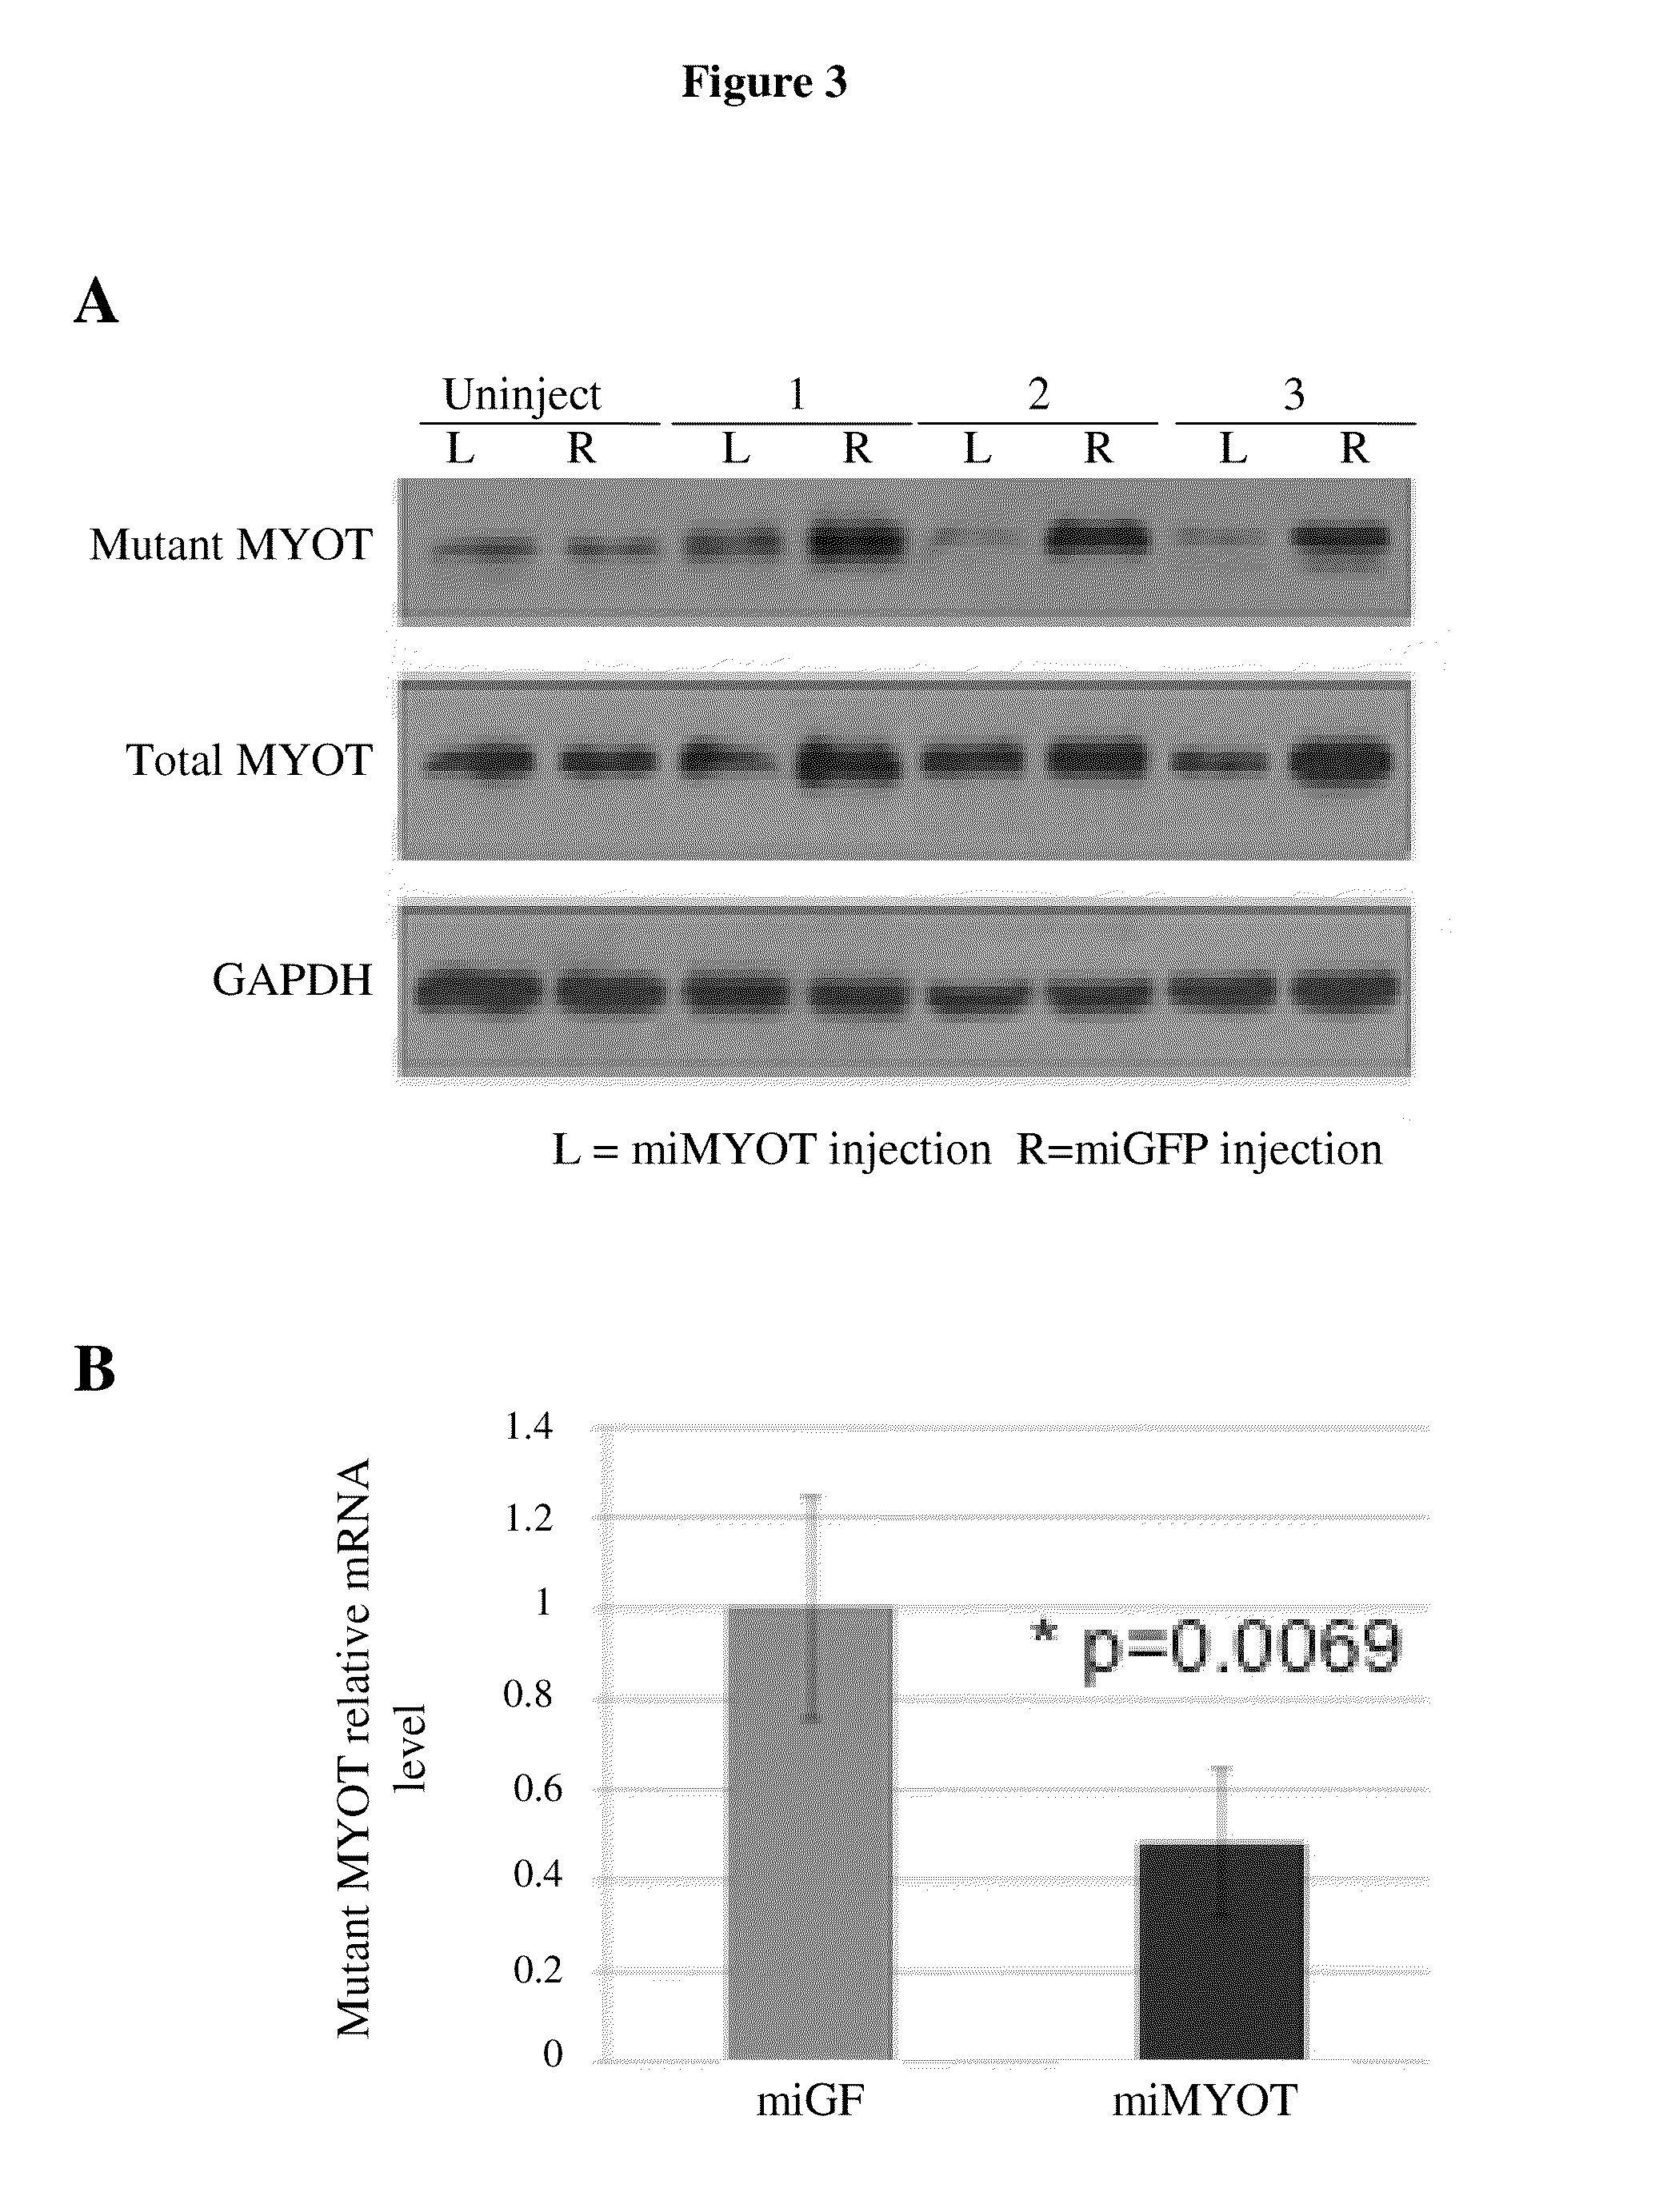 Recombinant virus products and methods for inhibition of expression of myotilin